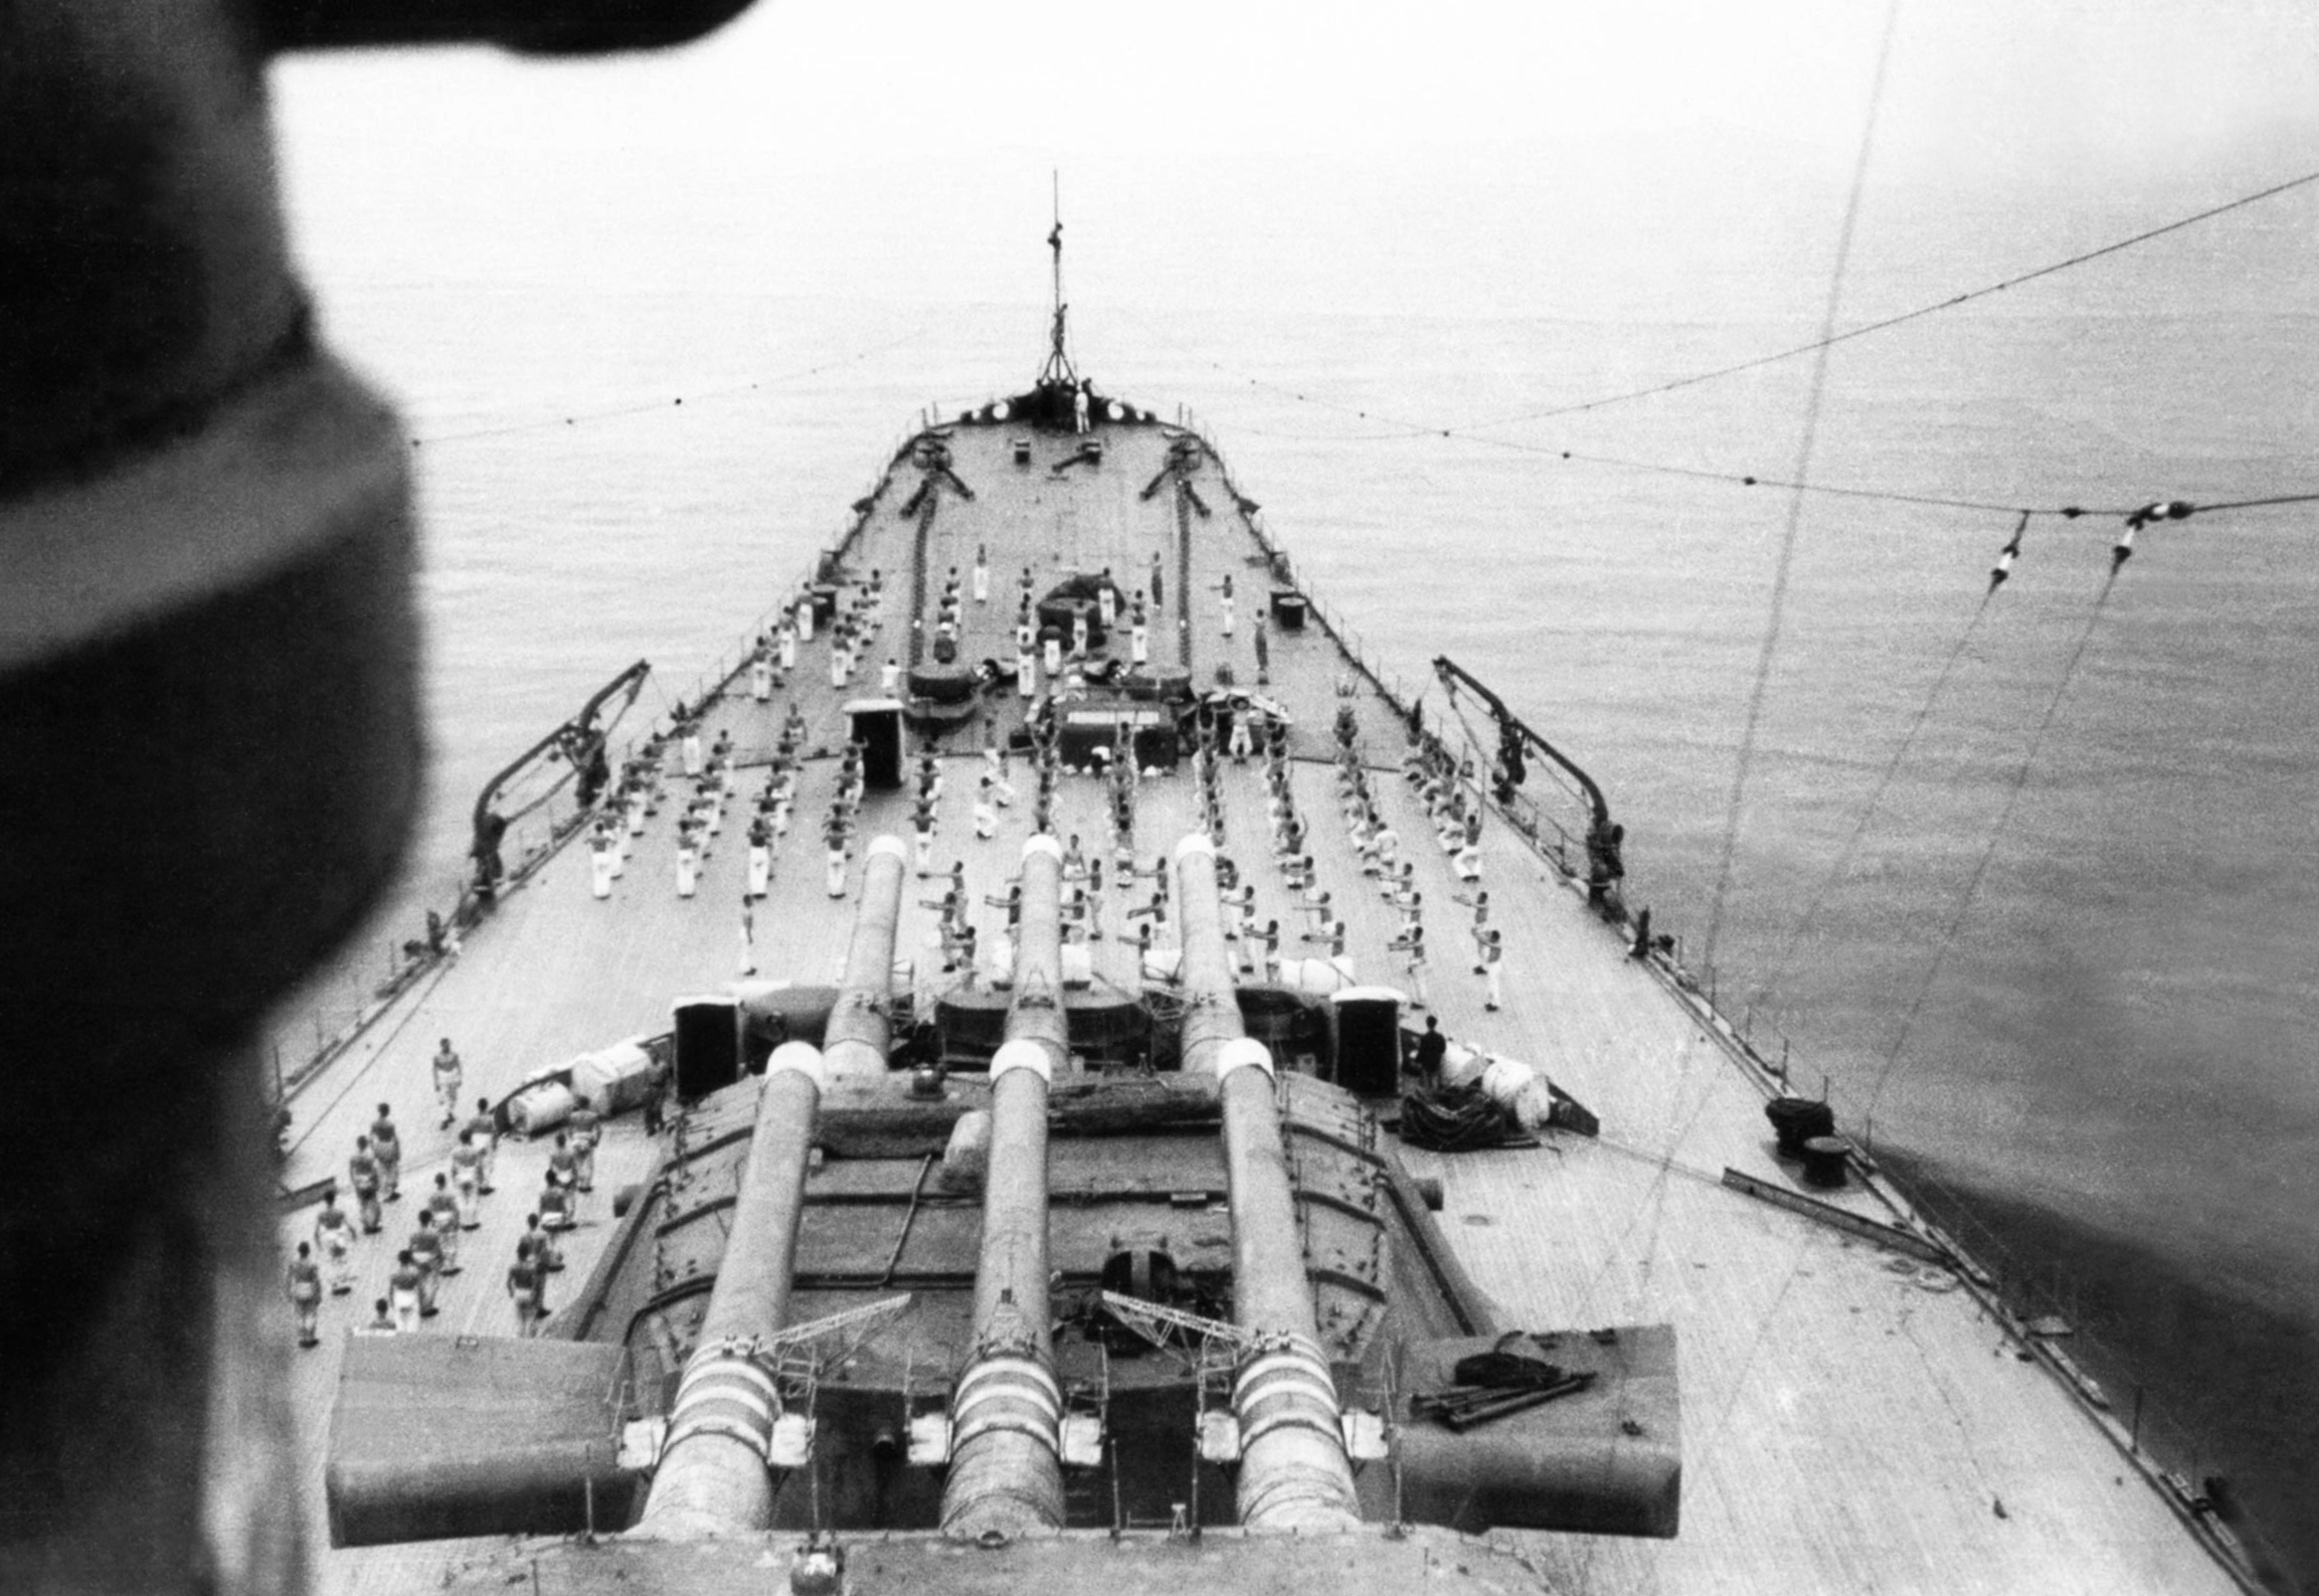 Musashi and her crew on forward deck, Jun 1942